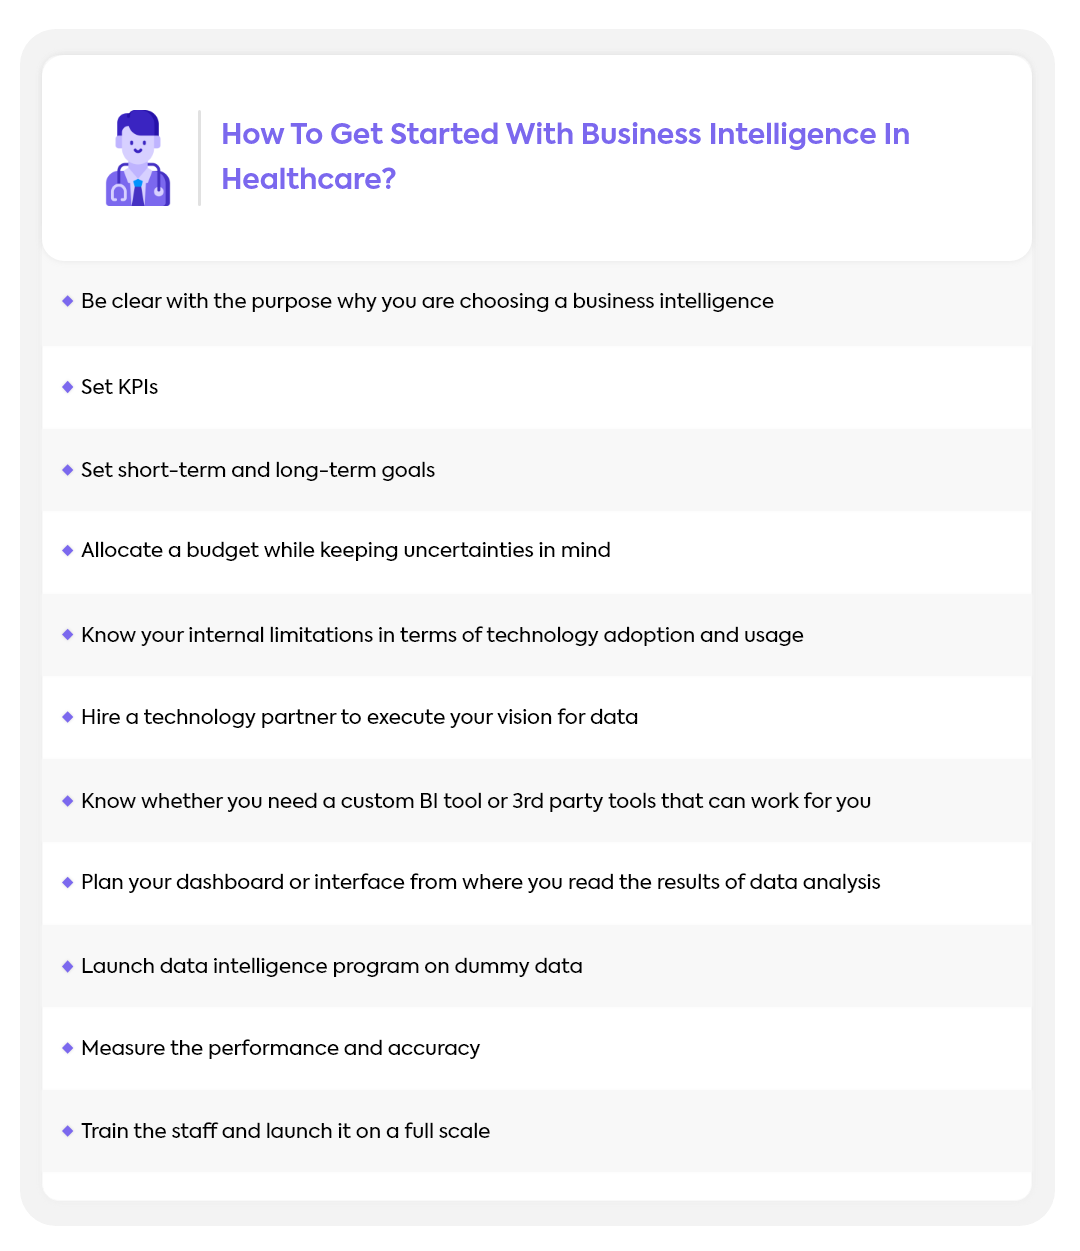 How to get started with business intelligence in healthcare? 